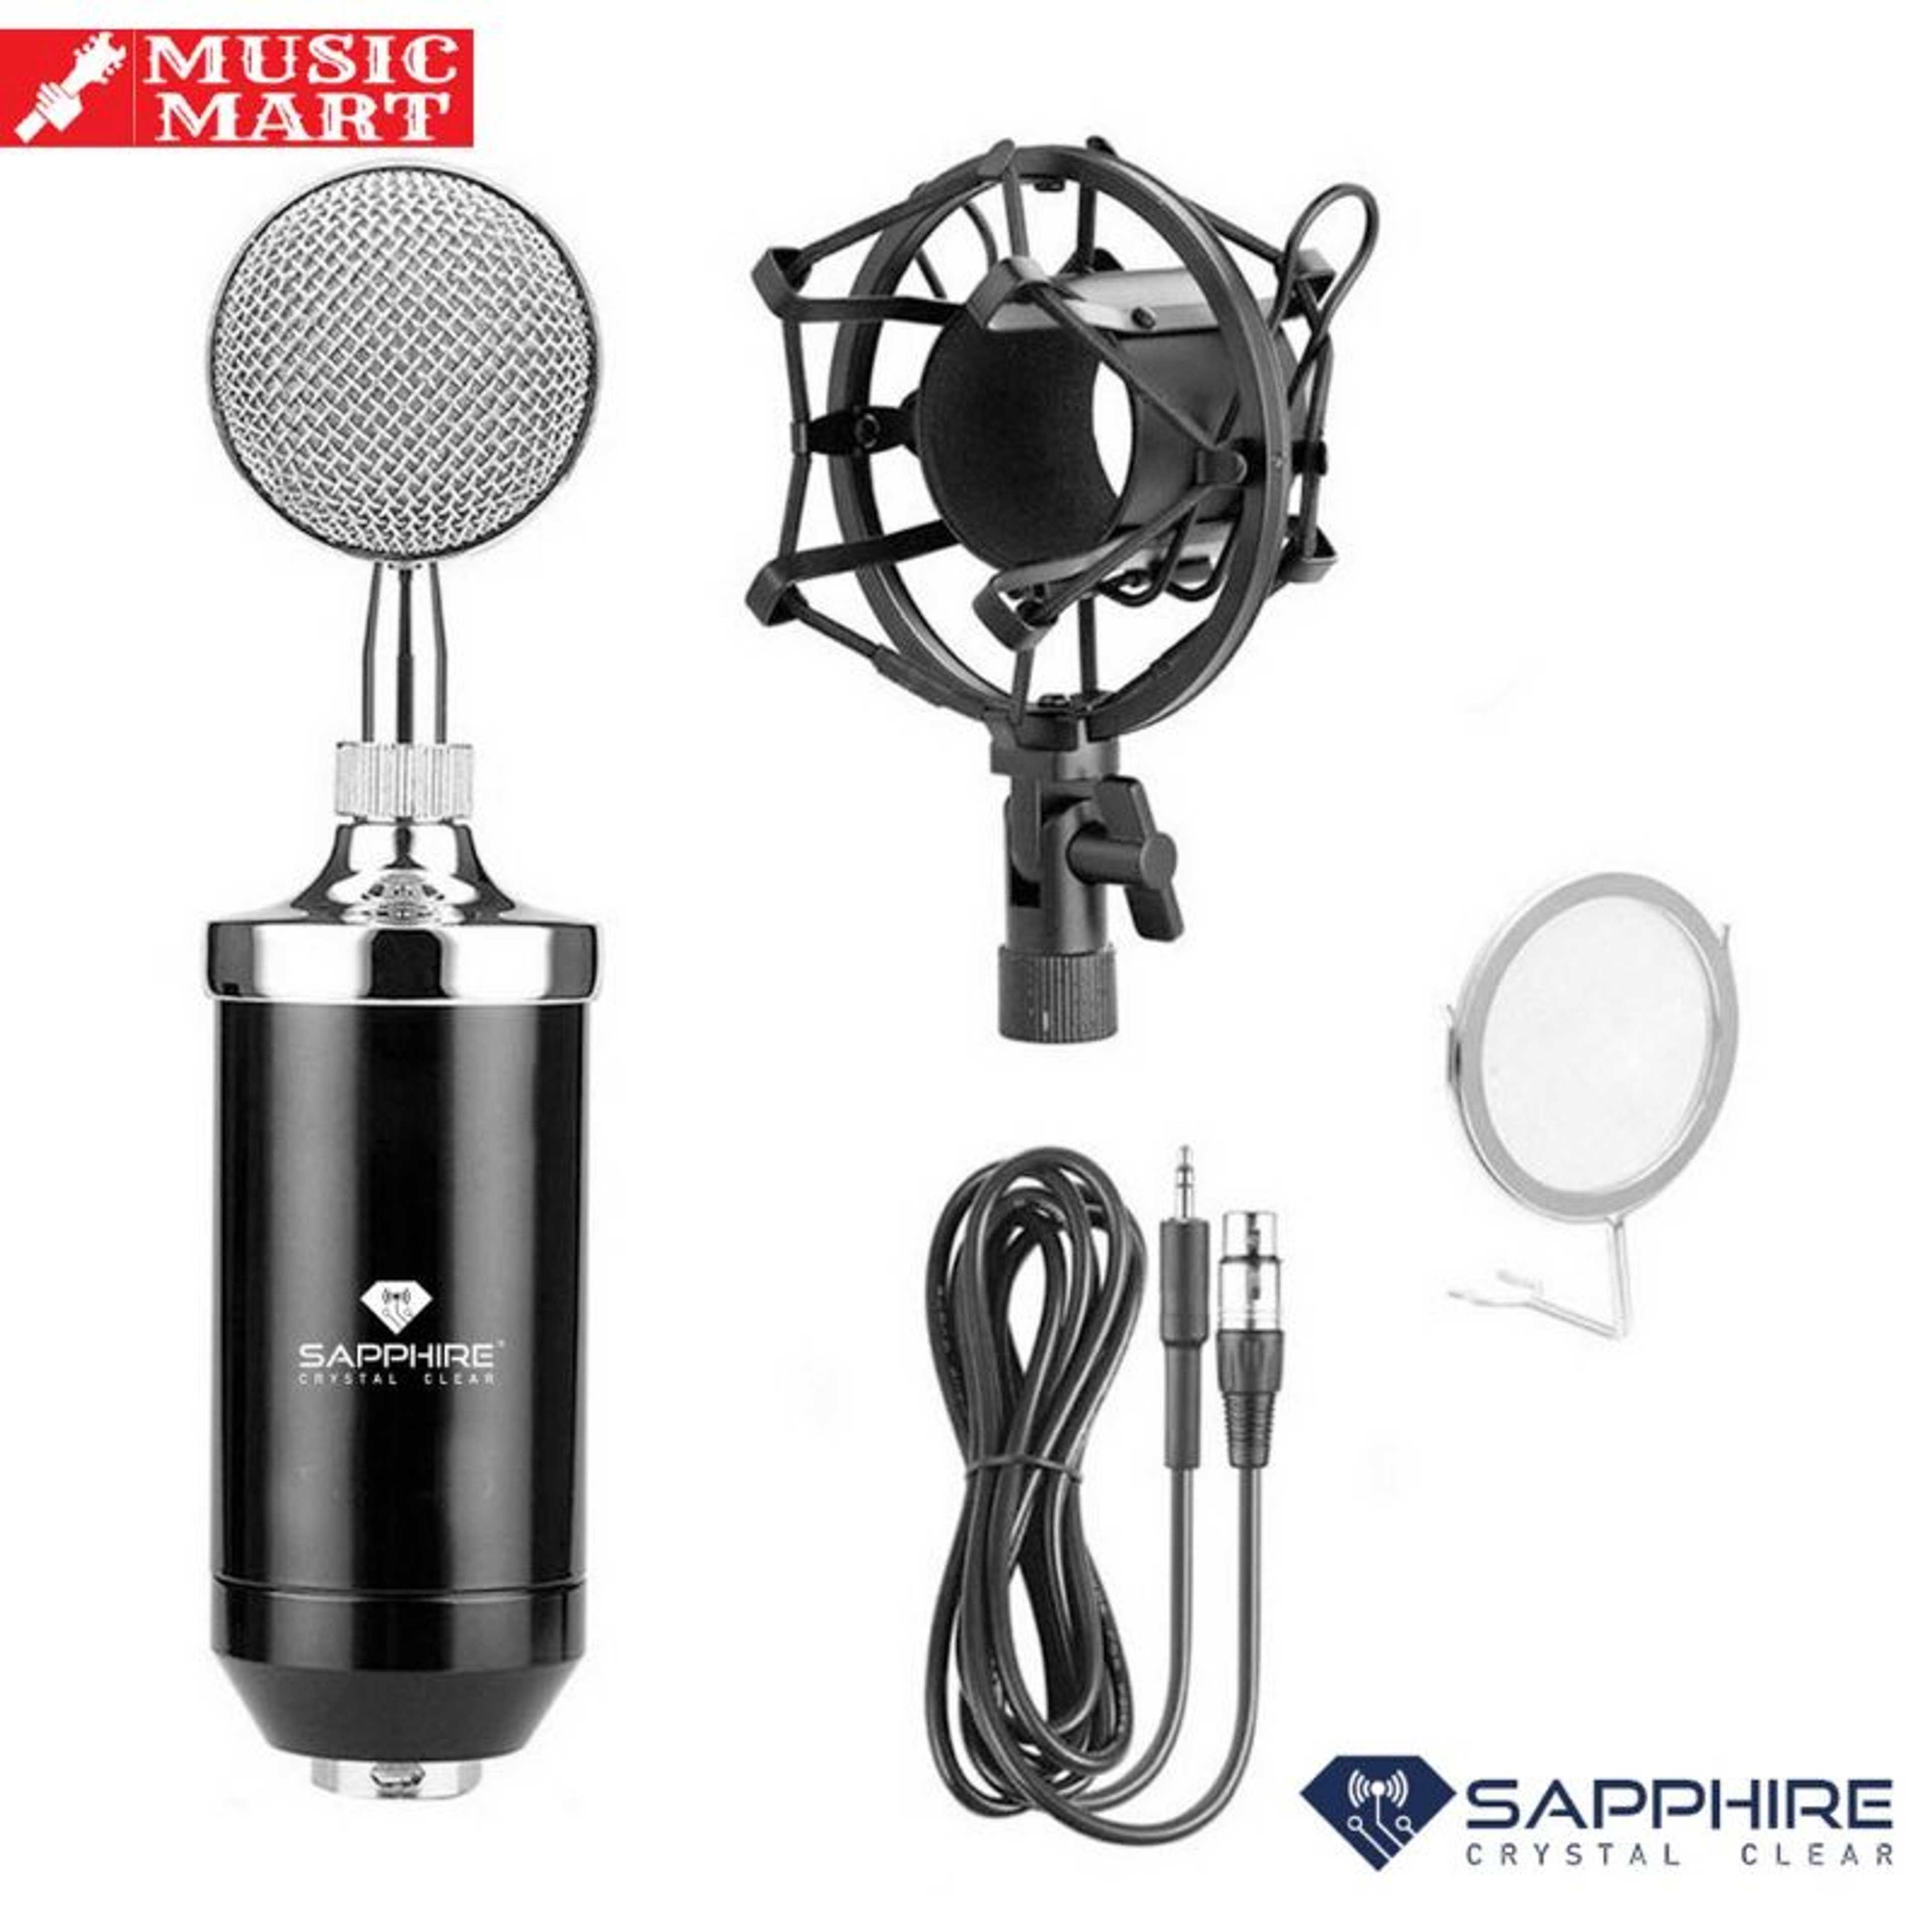 STYLISH ELEGANT STUDIO MICROPHONE BEST FOR VOCAL RECORDING - HIGH QUALITY - CARDIOID POLAR PATTERN CRYSTAL CLEAR SOUND QUALITY - BEST FOR HOME STUDIO - STYLISH DESIGN